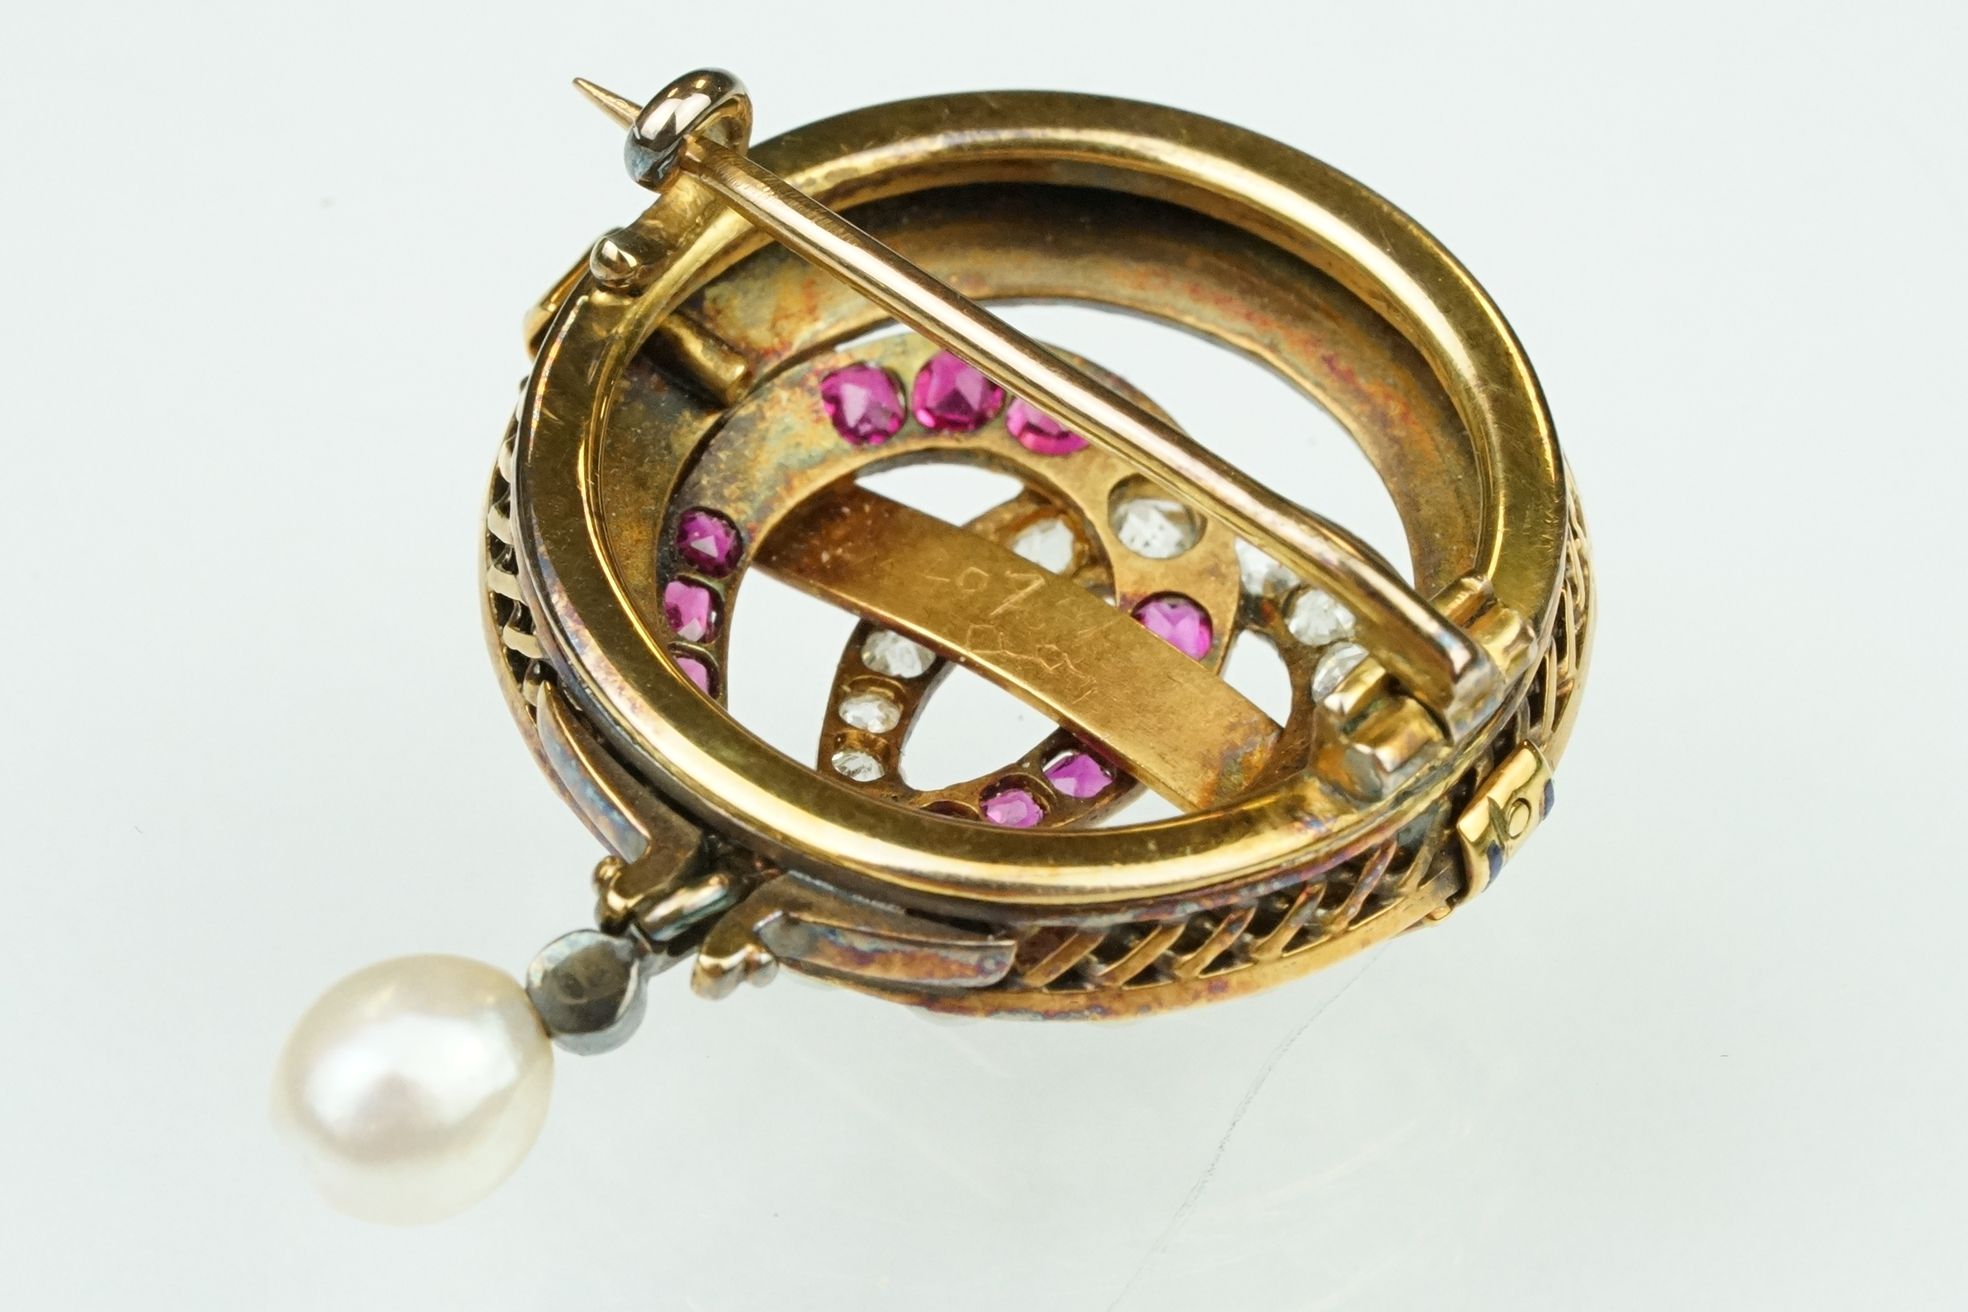 19th century ruby, diamond and pearl brooch, the two central entwined horse shoe motifs set with - Image 9 of 13